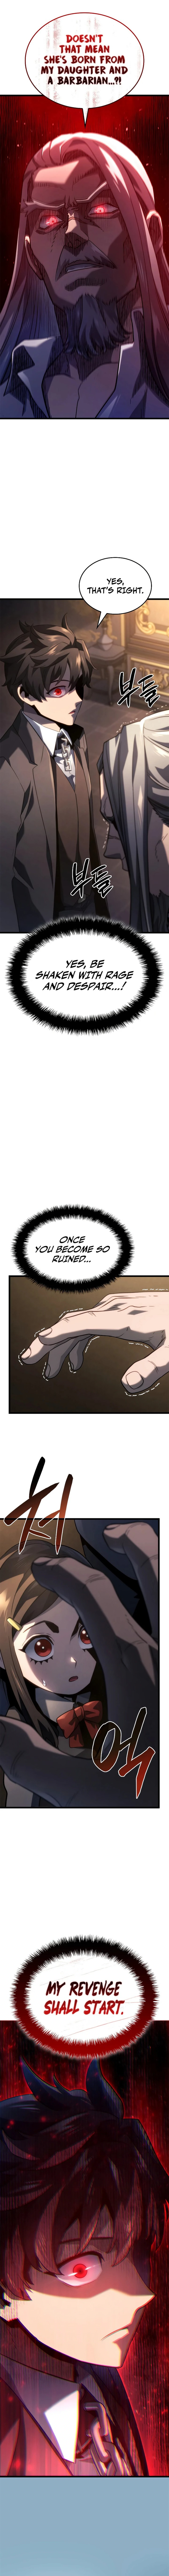 lets read your favorit Read Revenge of the Iron-Blooded Sword Hound Chapter 67 Online Chapter  web comic toon manga online here on meowscan